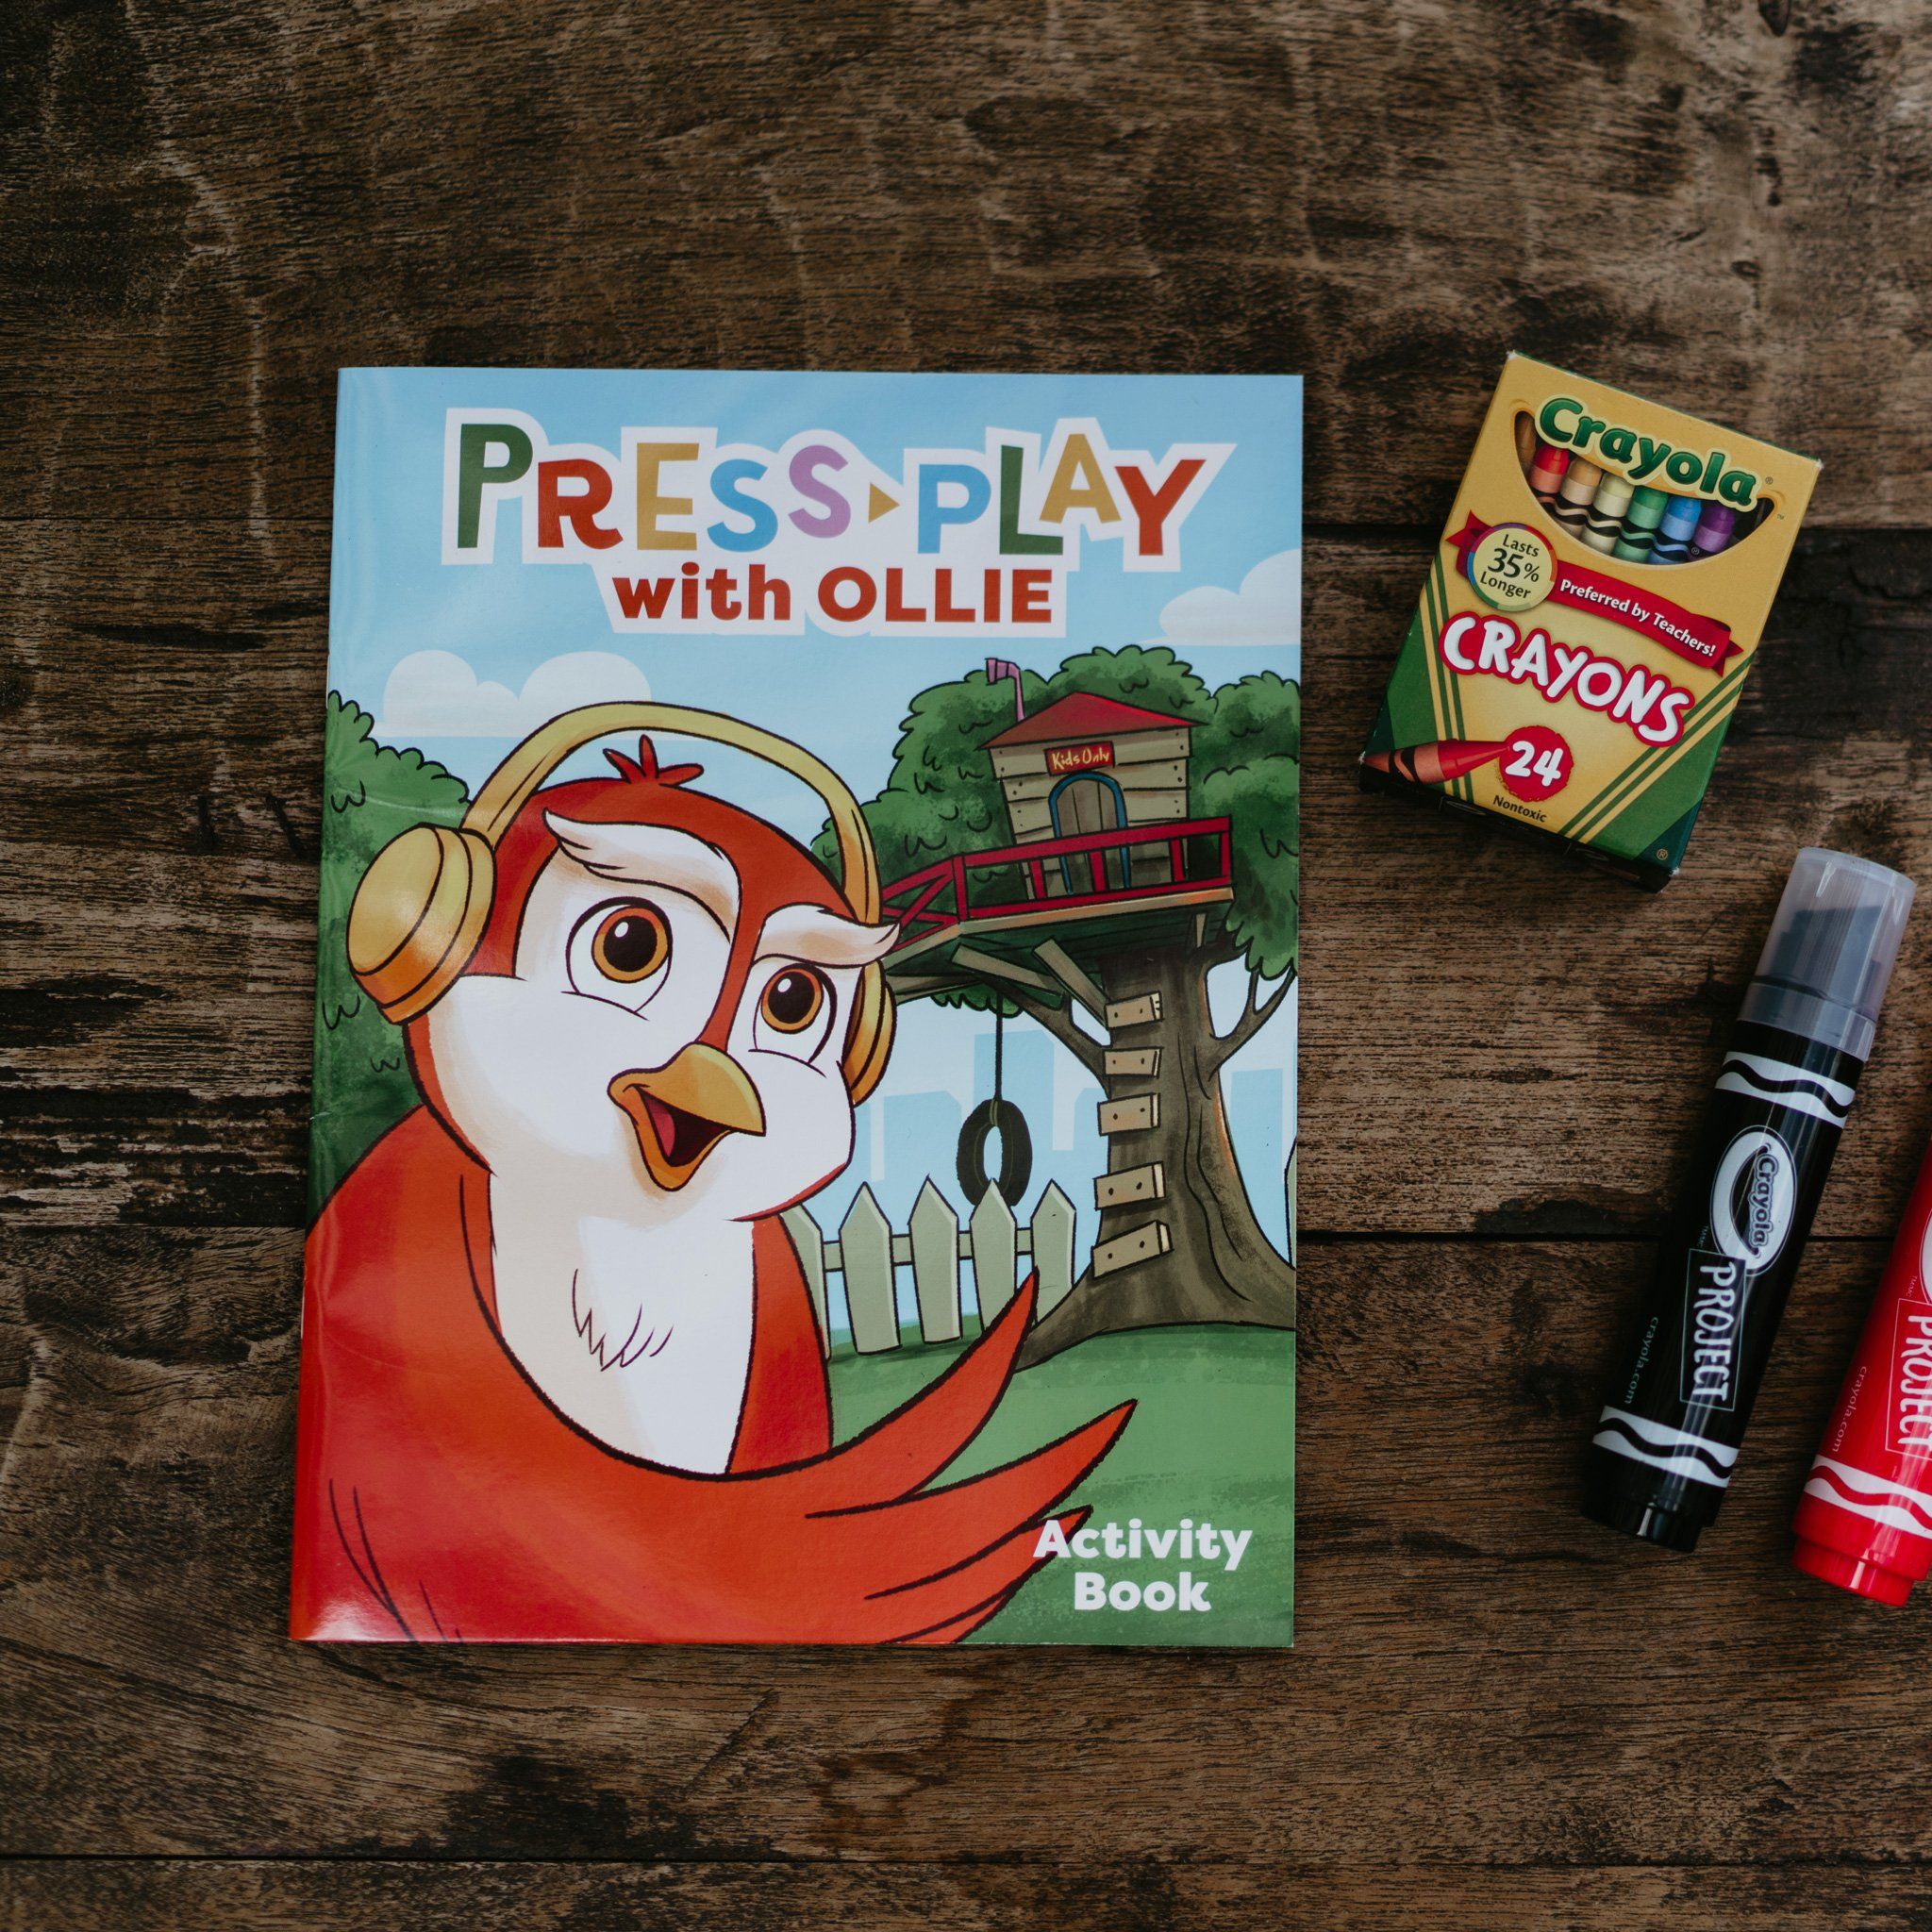 My First Tackle Box Interactive Book – Olly-Olly